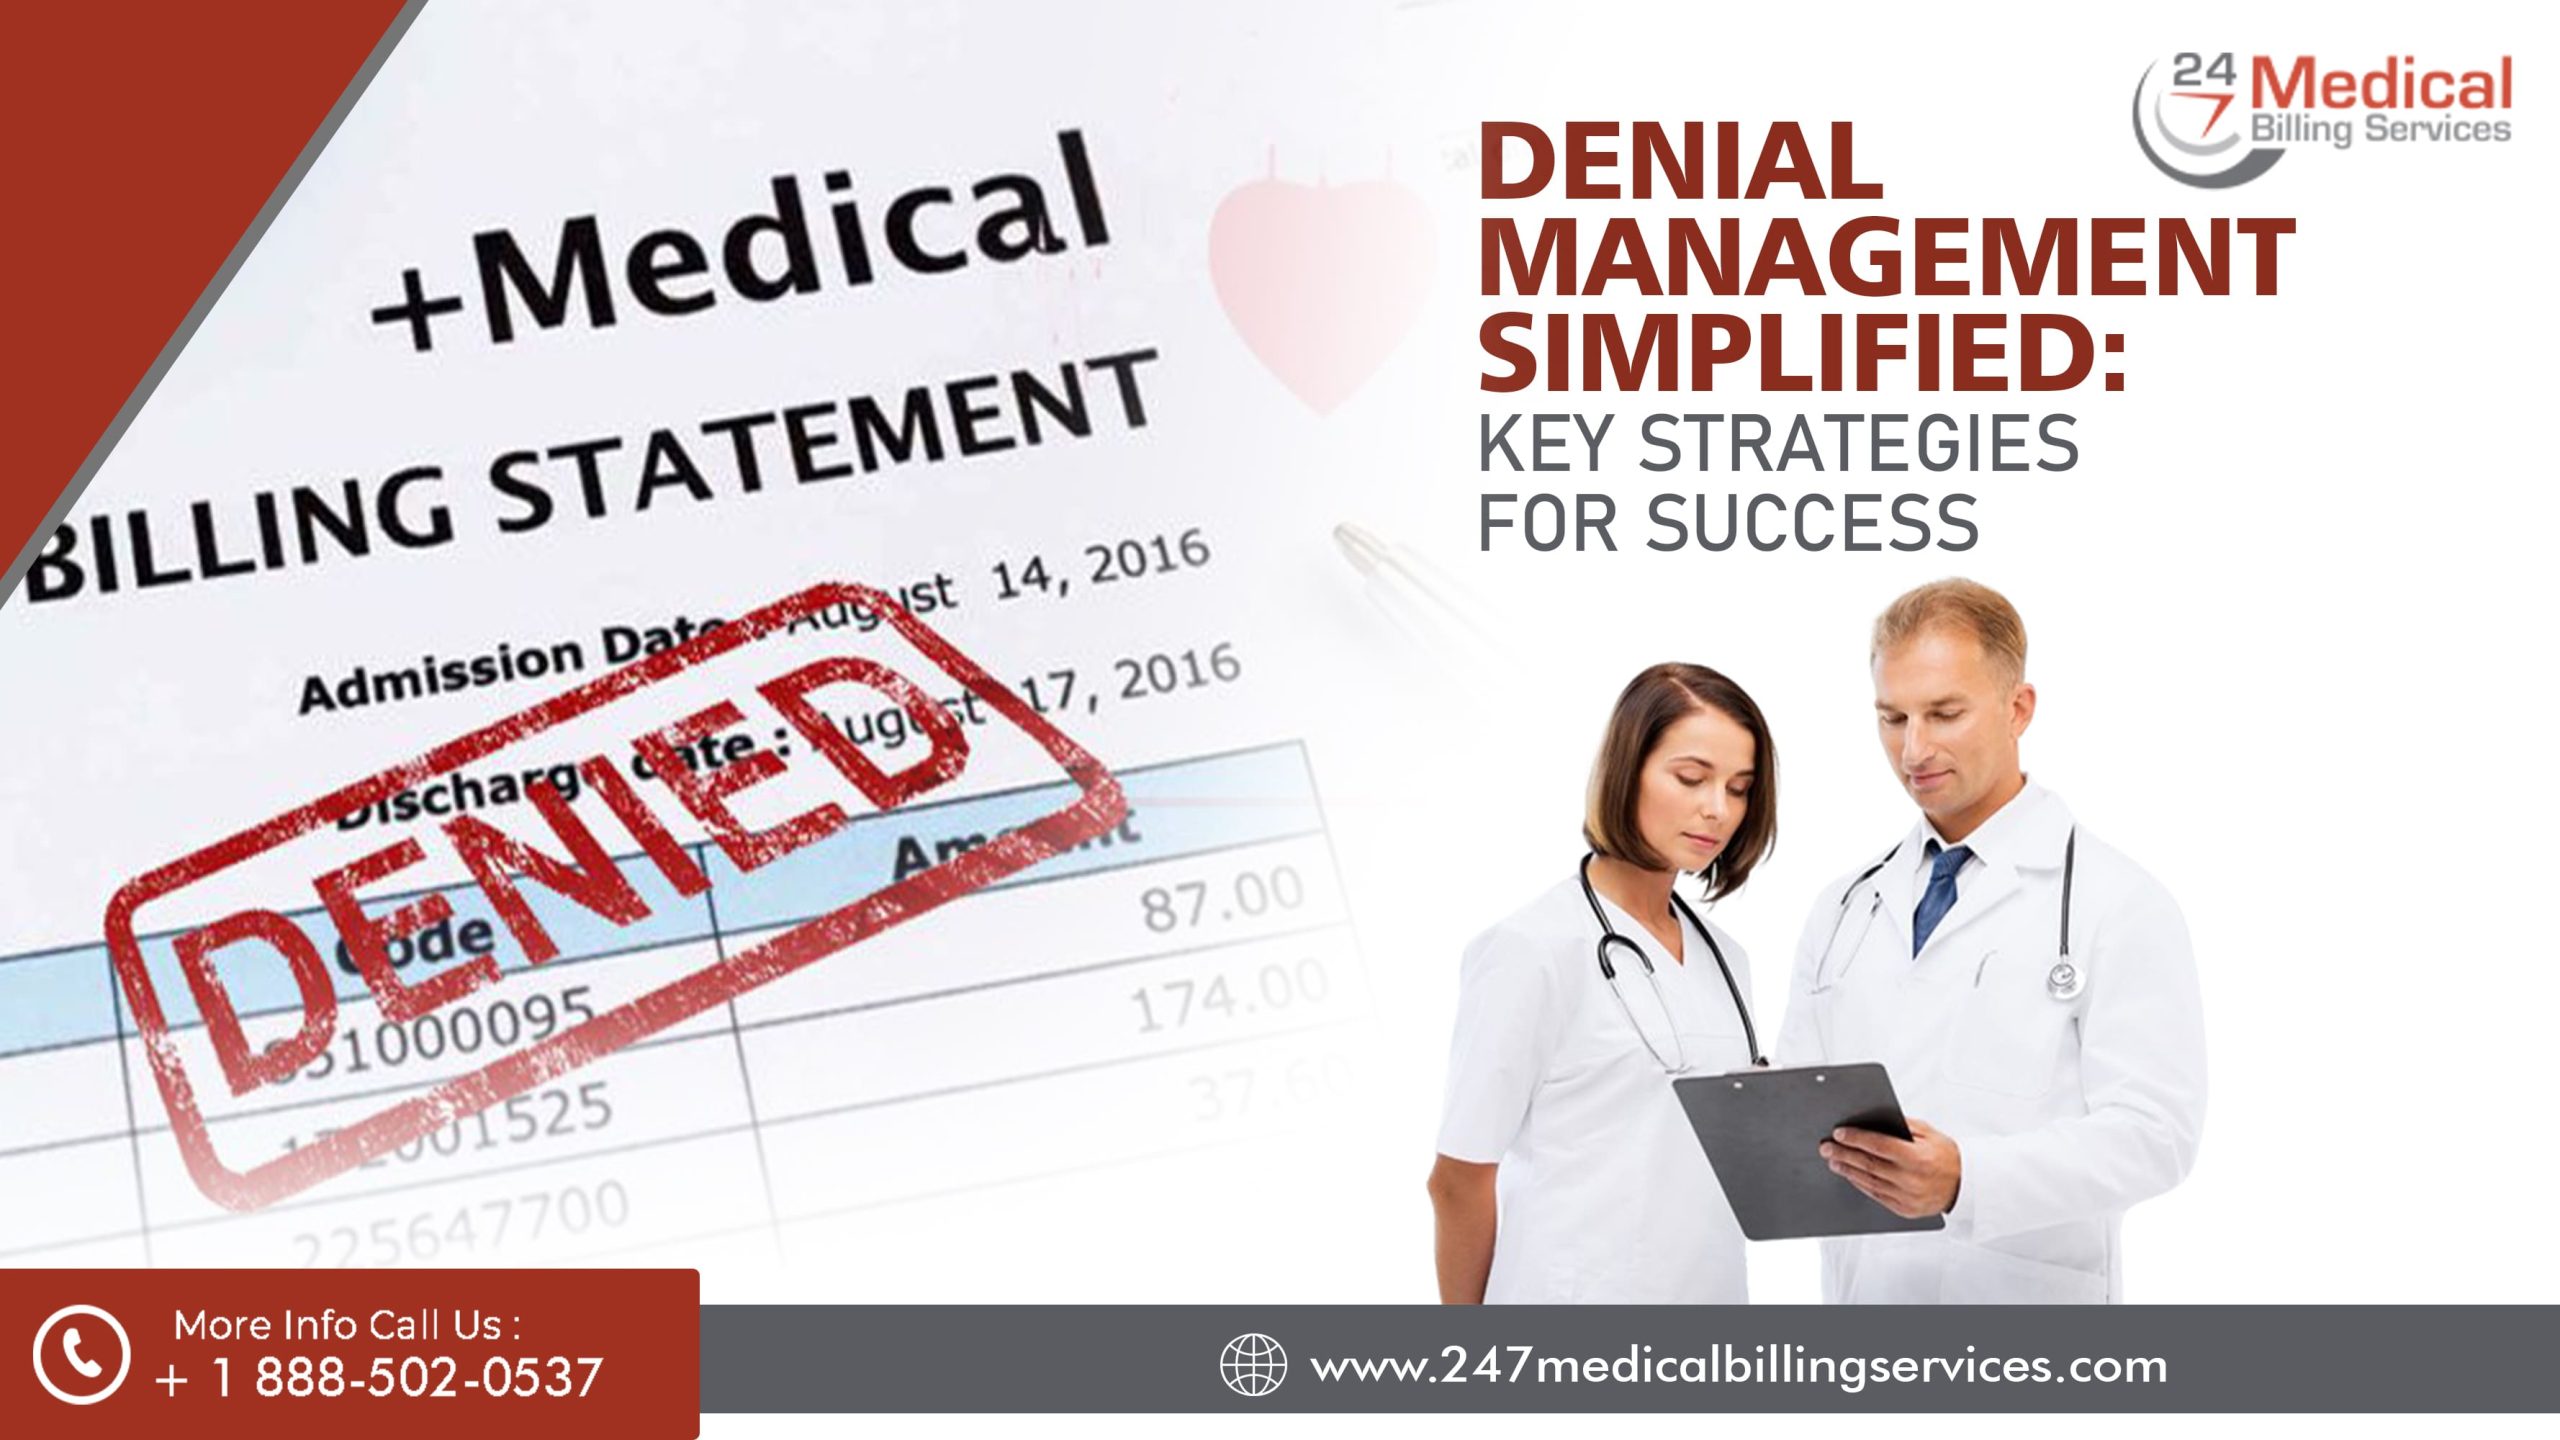  Denial Management Simplified: Key Strategies for Success